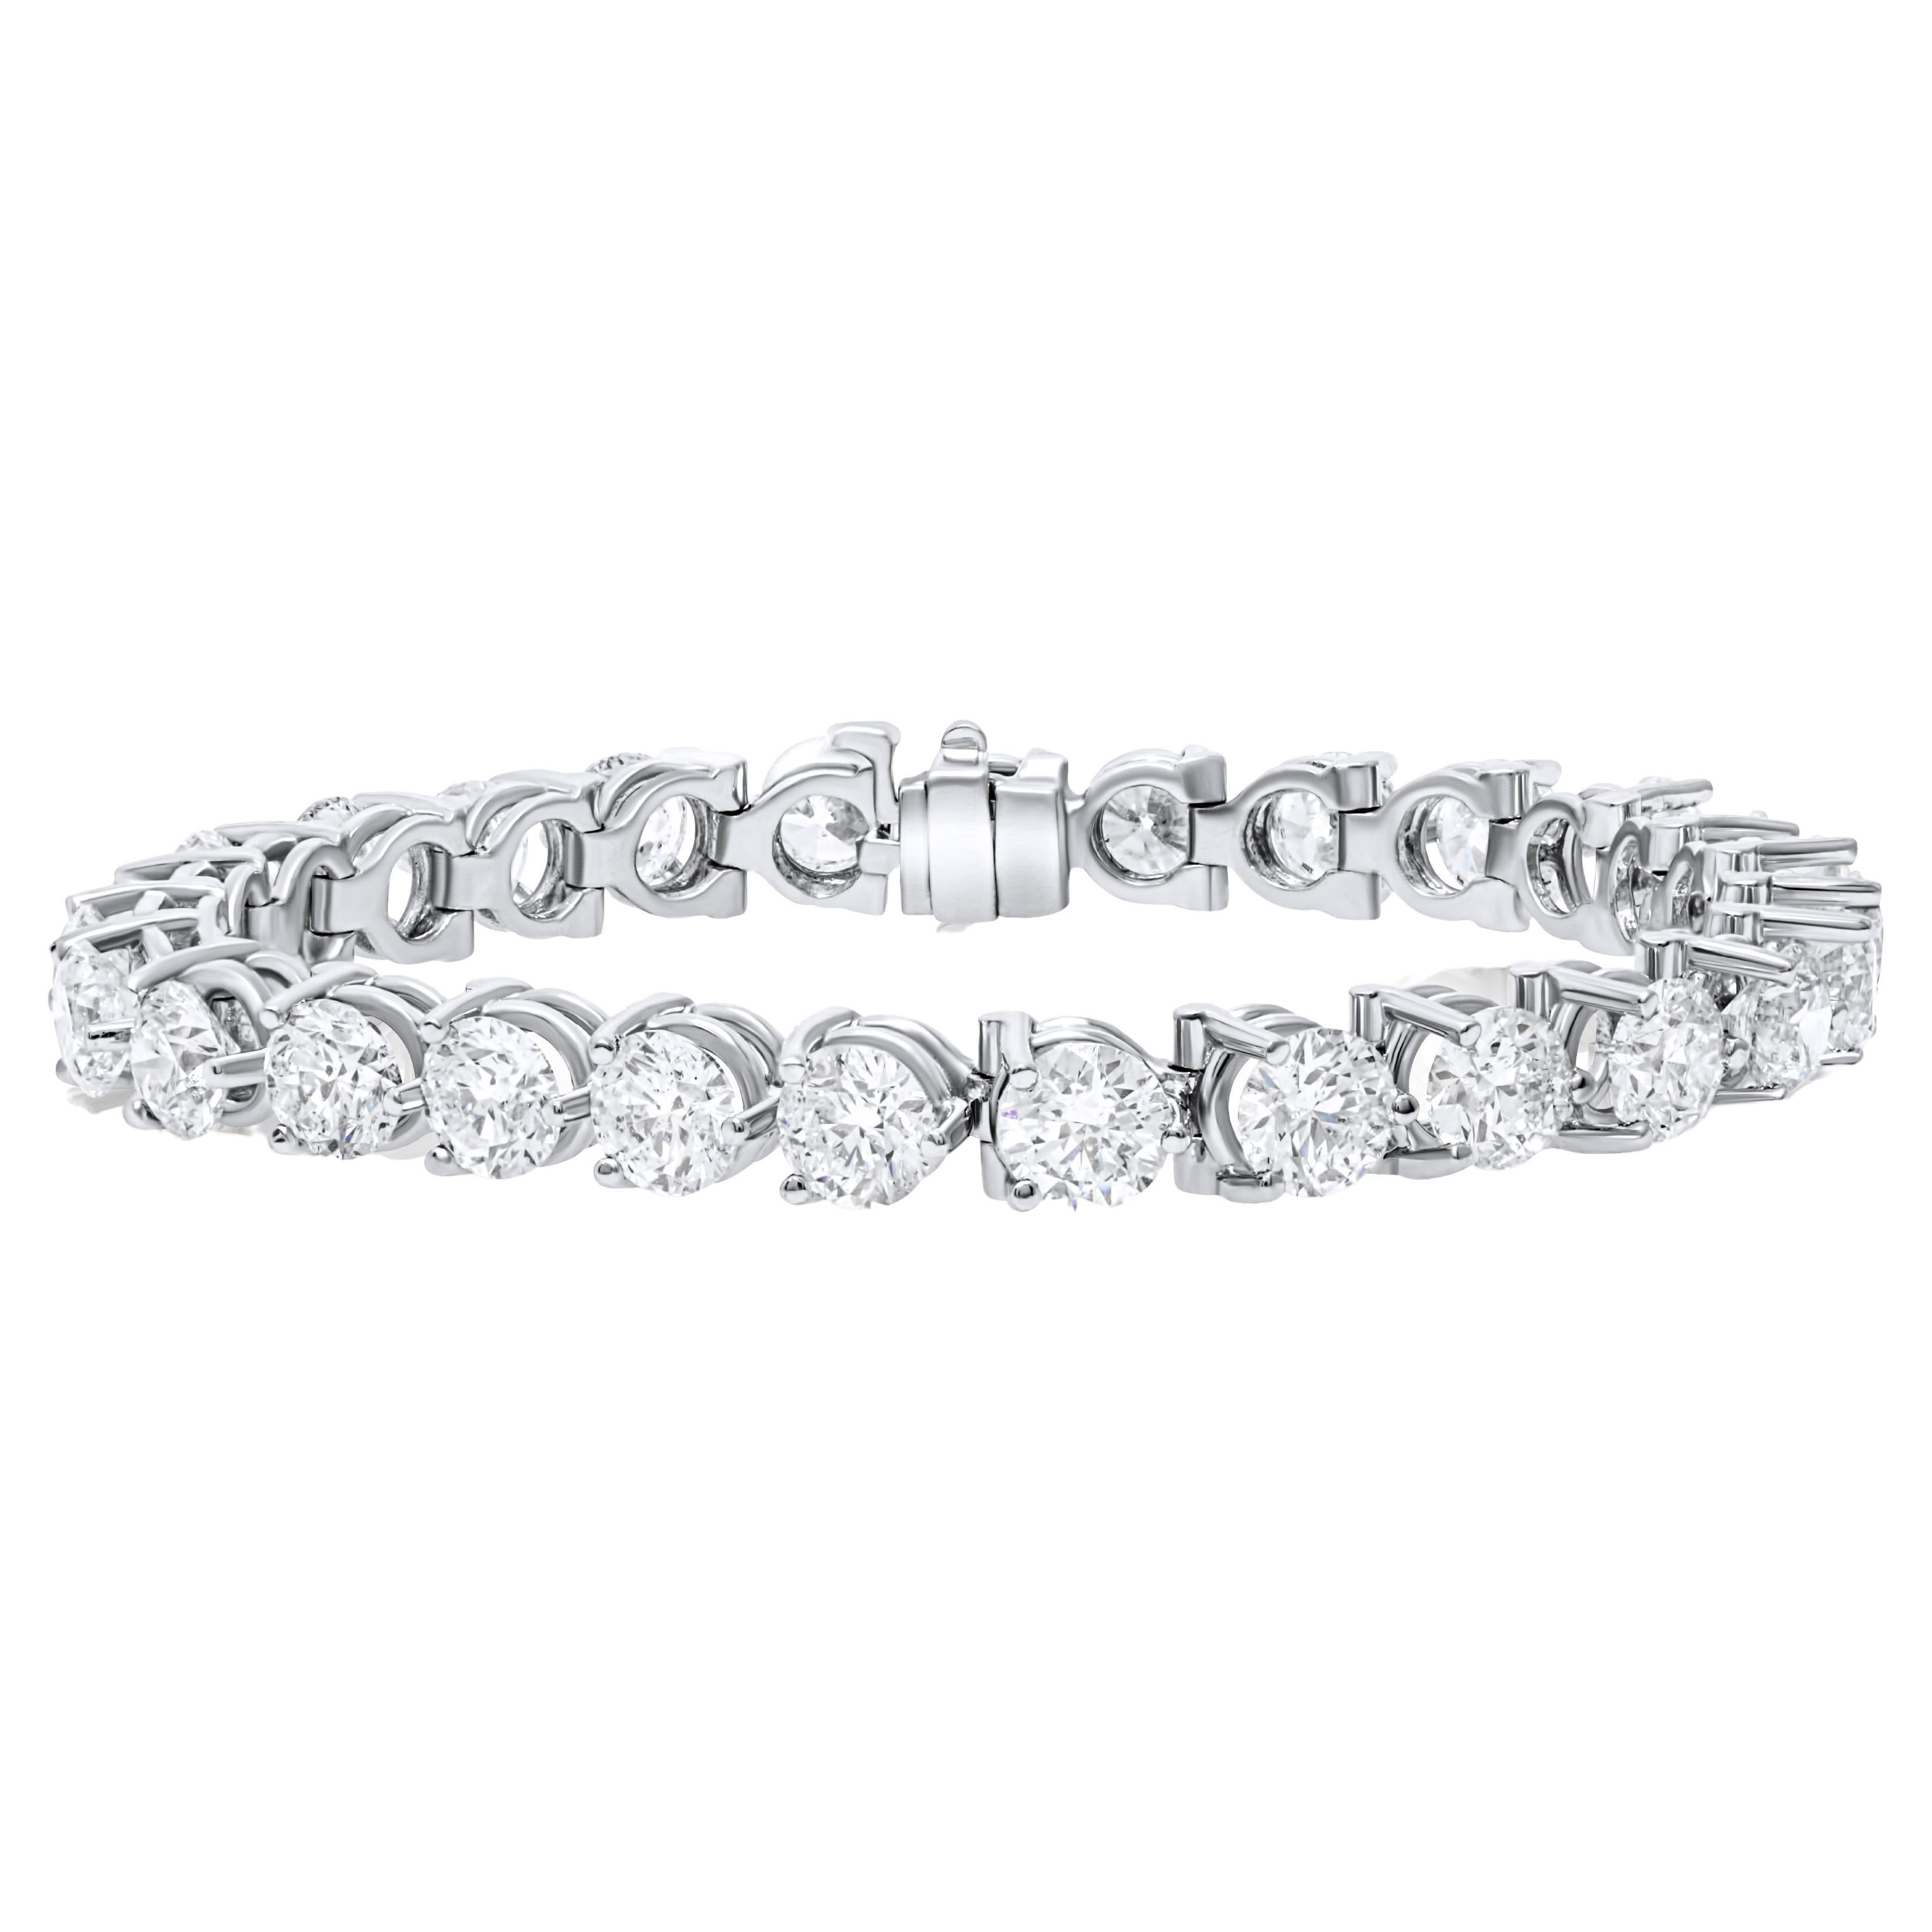 Diana M. 18 kt white gold 3 prong diamond tennis bracelet adorned with 5.60 cts For Sale